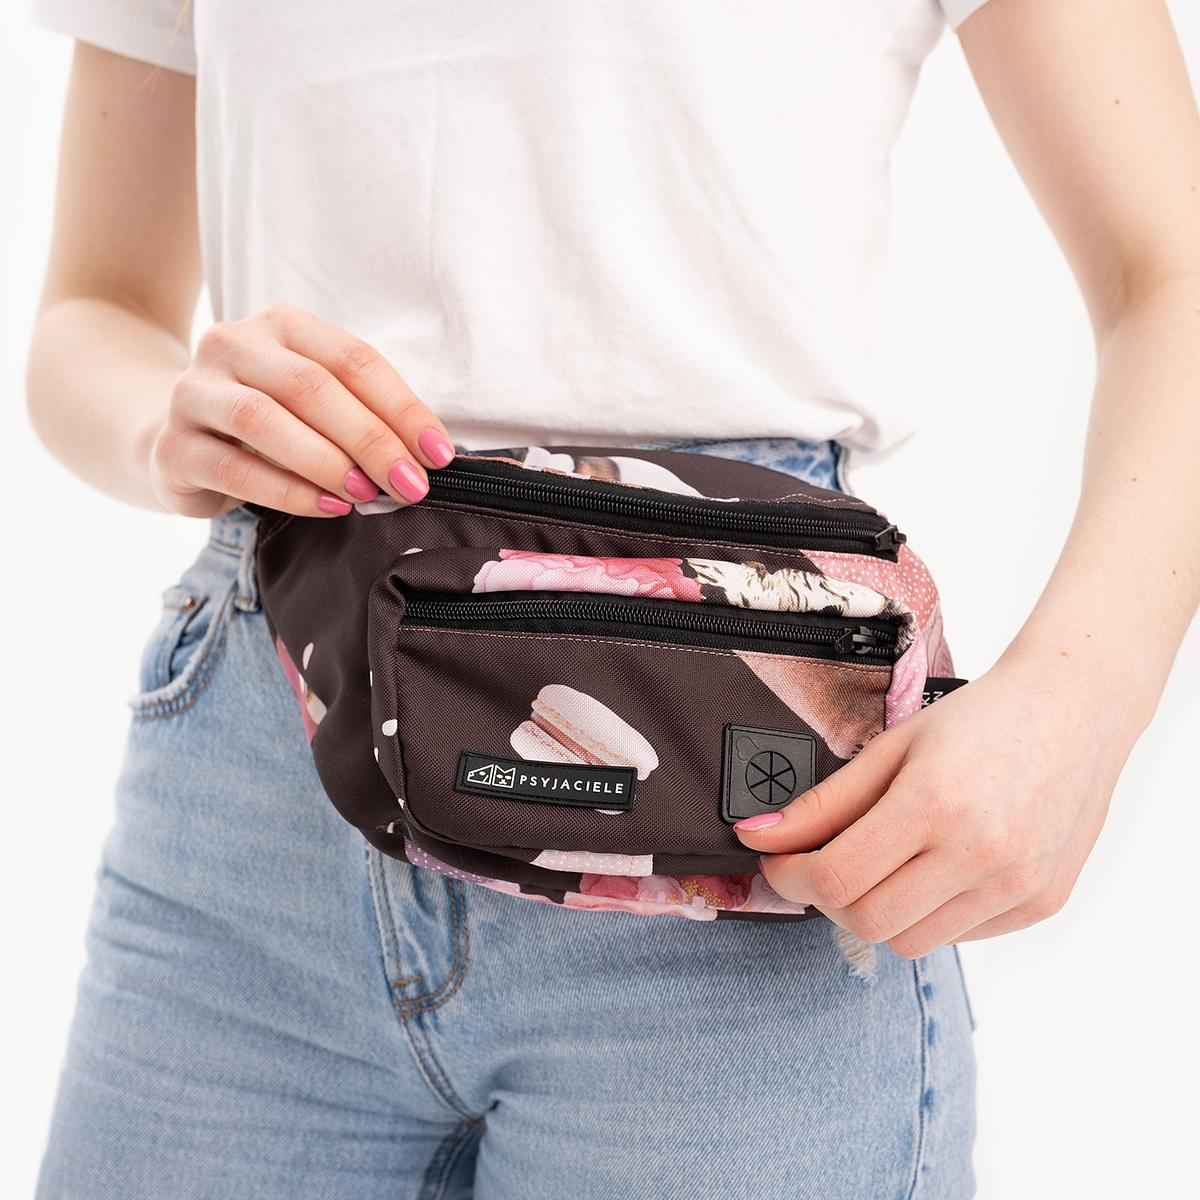 Fanny pack "Too sweet to handle"